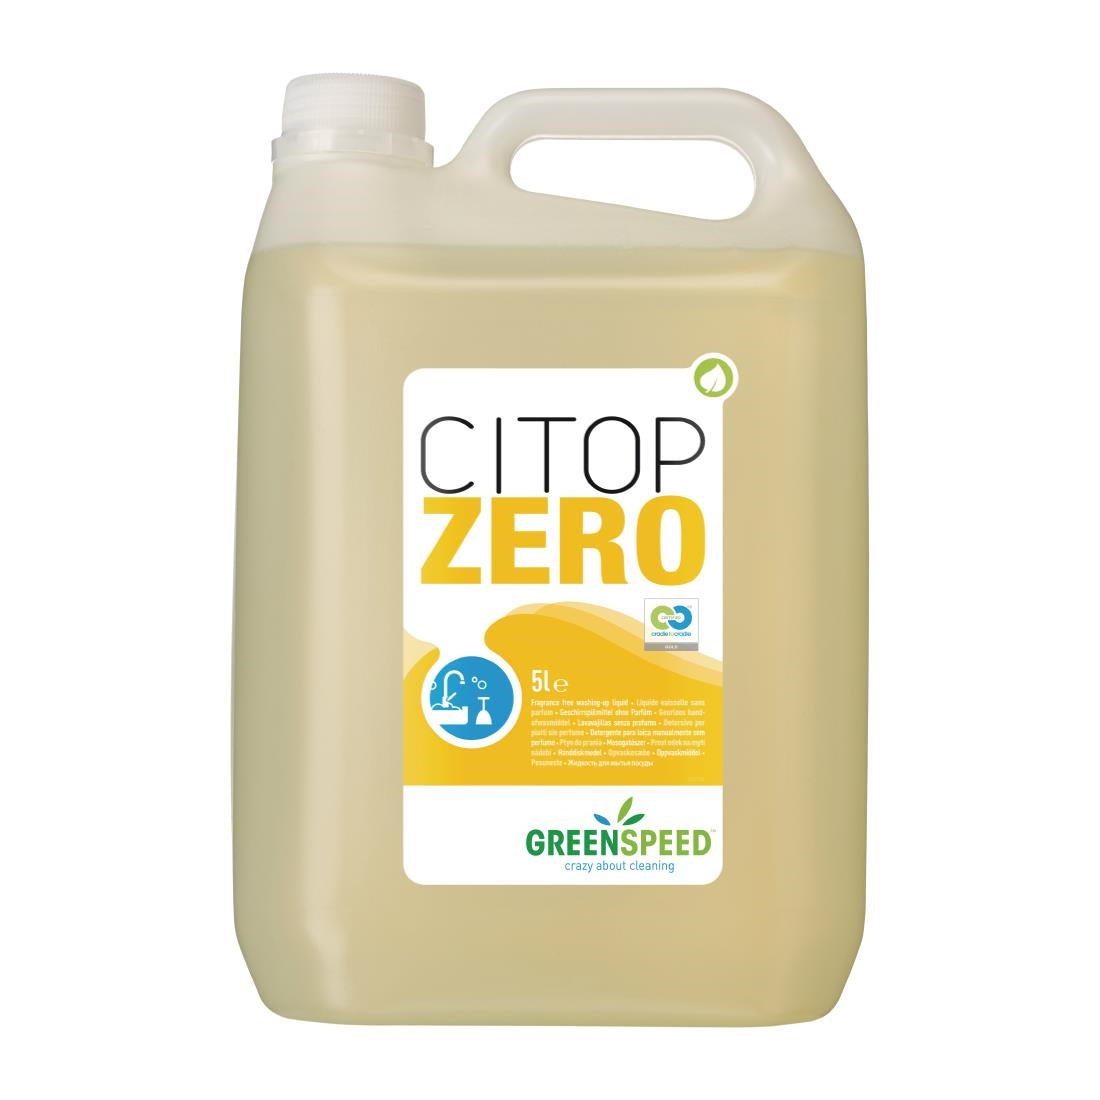 CX176 Greenspeed Washing Up Liquid Concentrate 5Ltr JD Catering Equipment Solutions Ltd